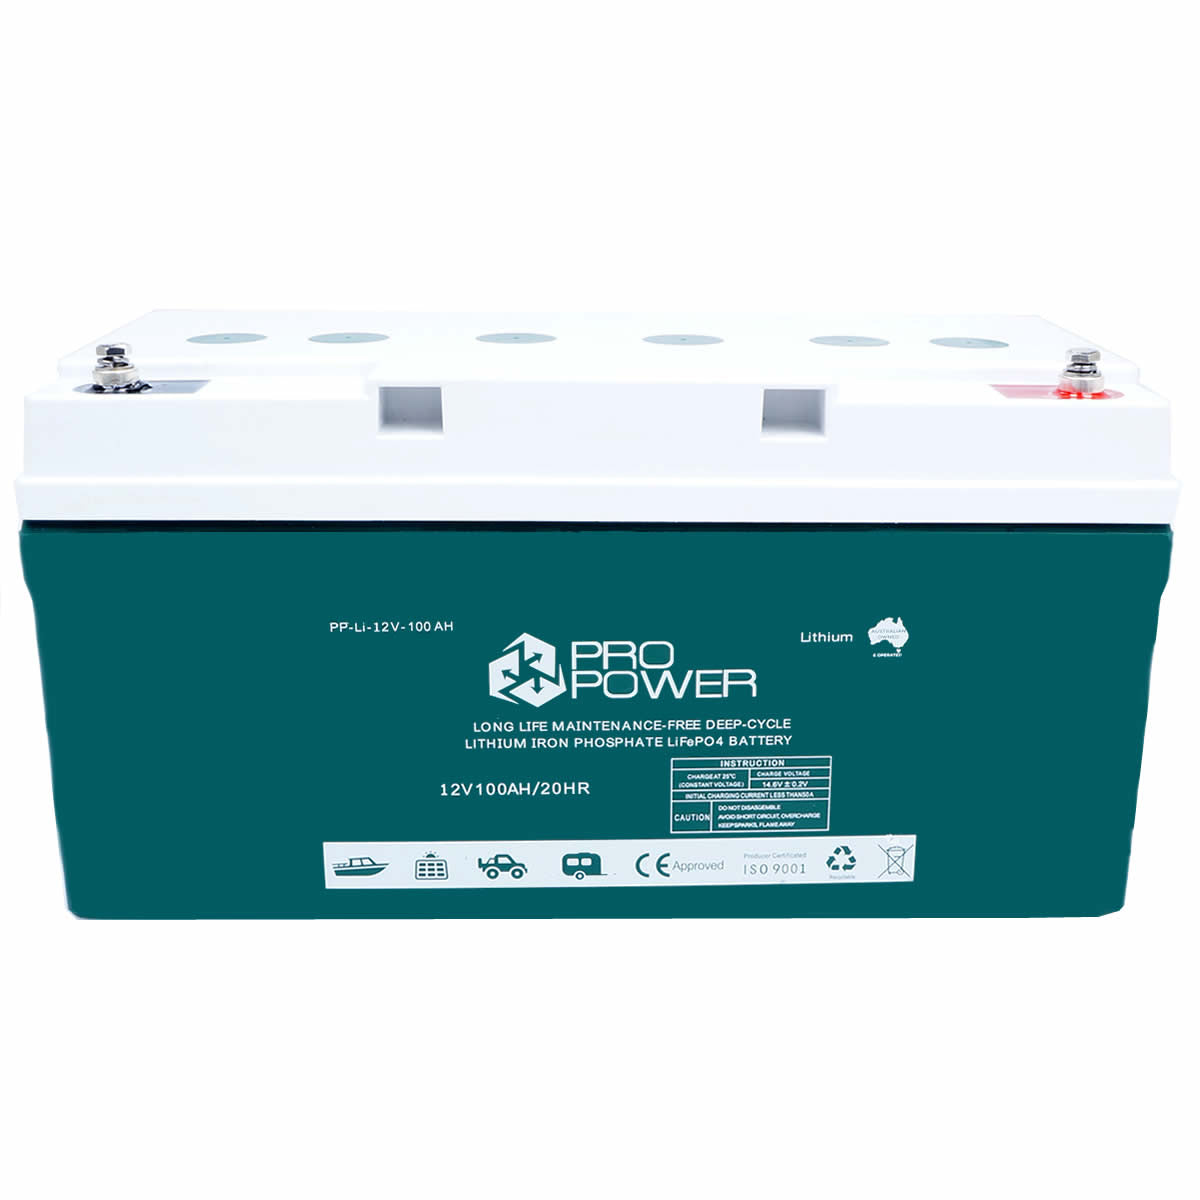 Pro power - battery - Lithium